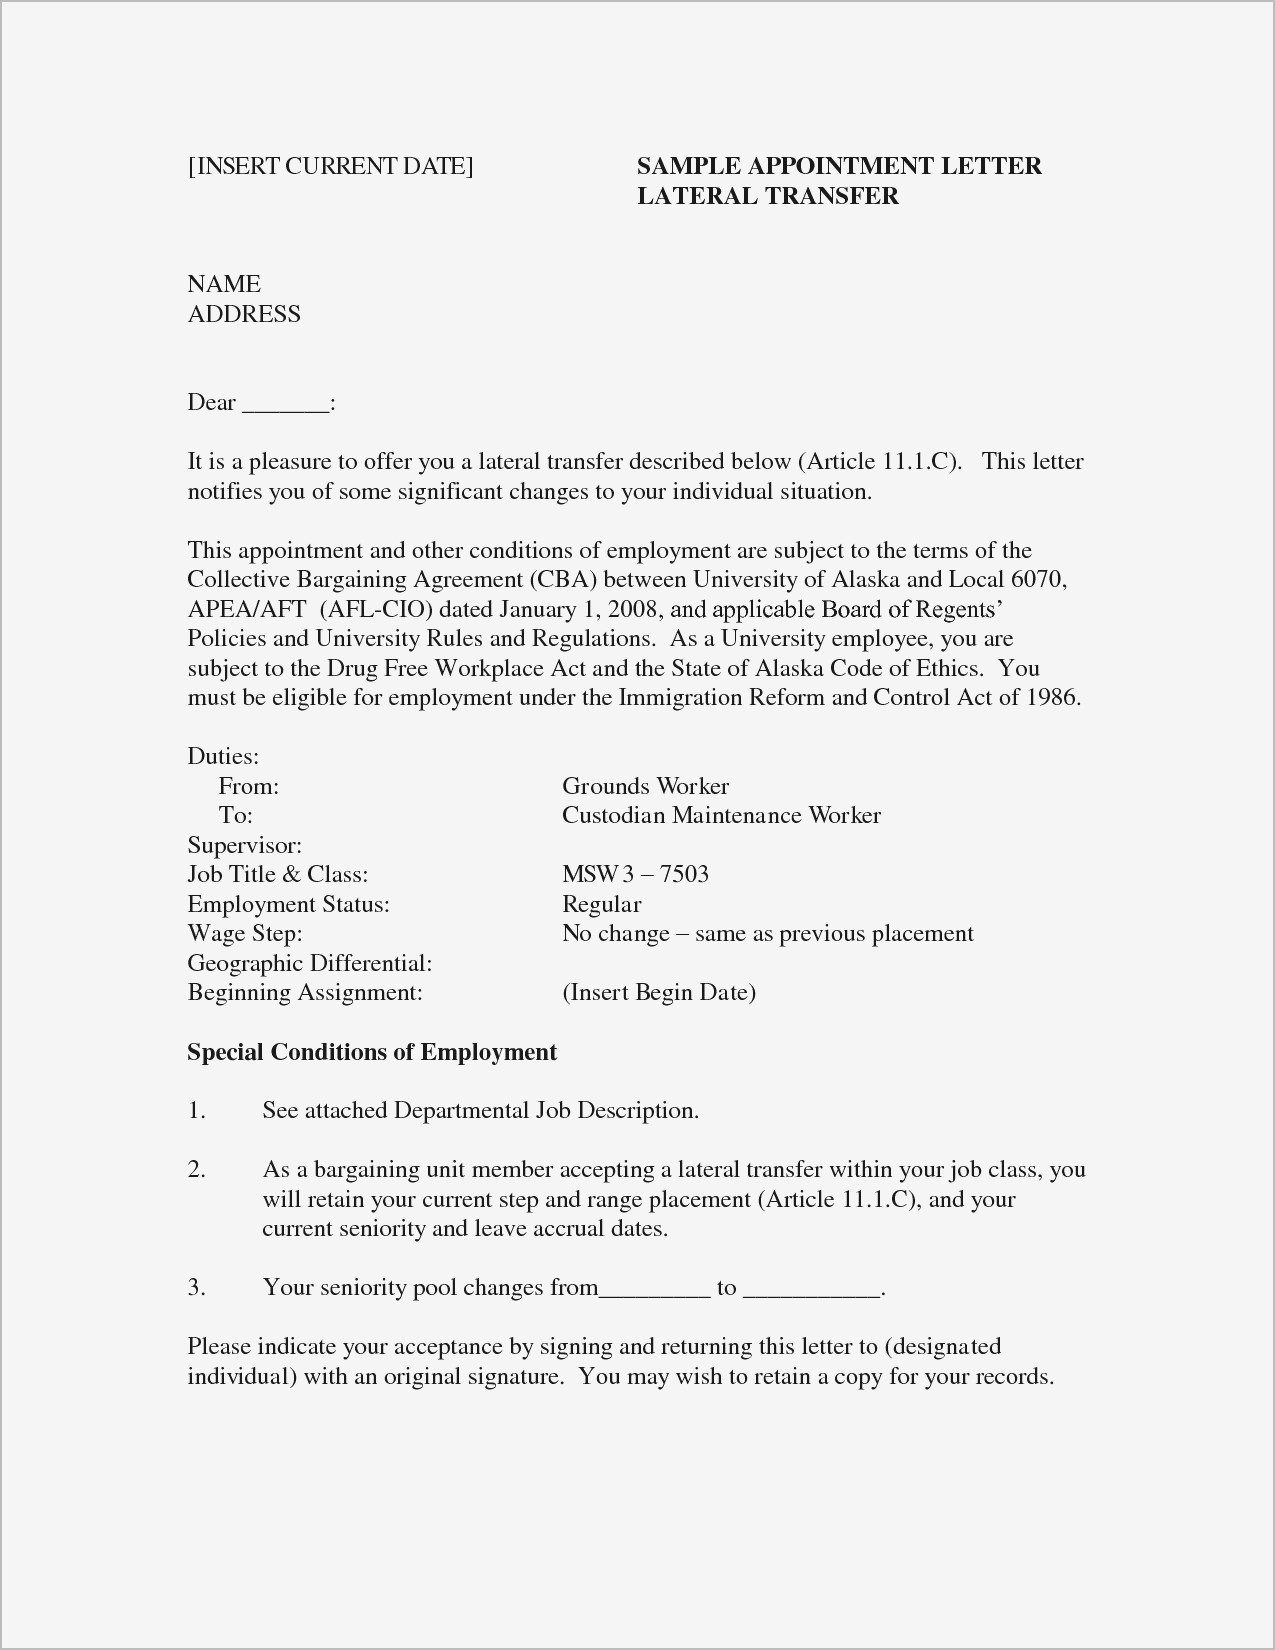 Employment Job Offer Letter Template - Accepting A Job Fer Letter Valid Job Fer Letter Template Us Copy